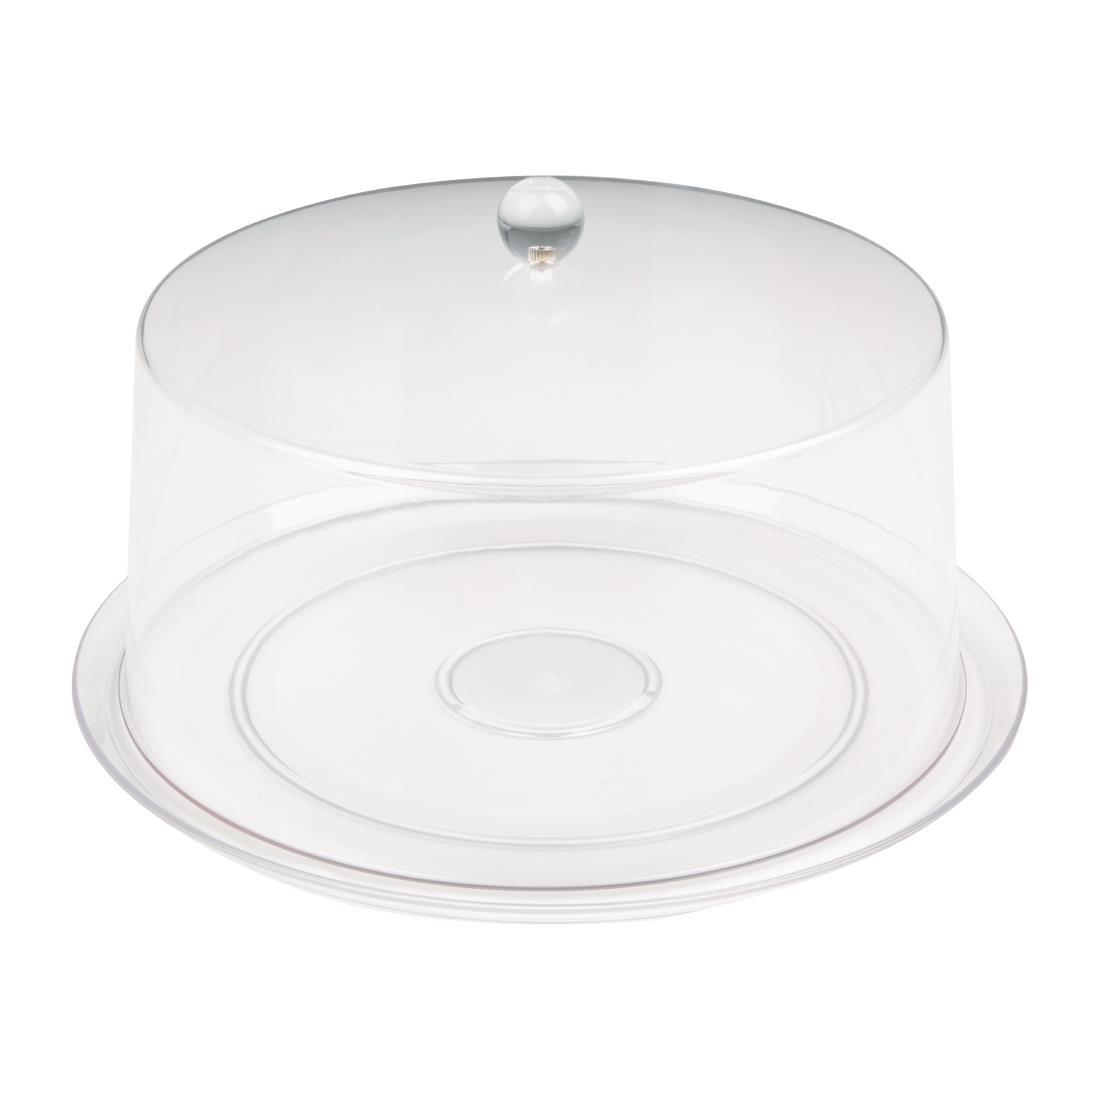 Olympia Kristallon Polycarbonate Display Cover Clear 308(Ø) x 190(H)mm - FE473  - 4